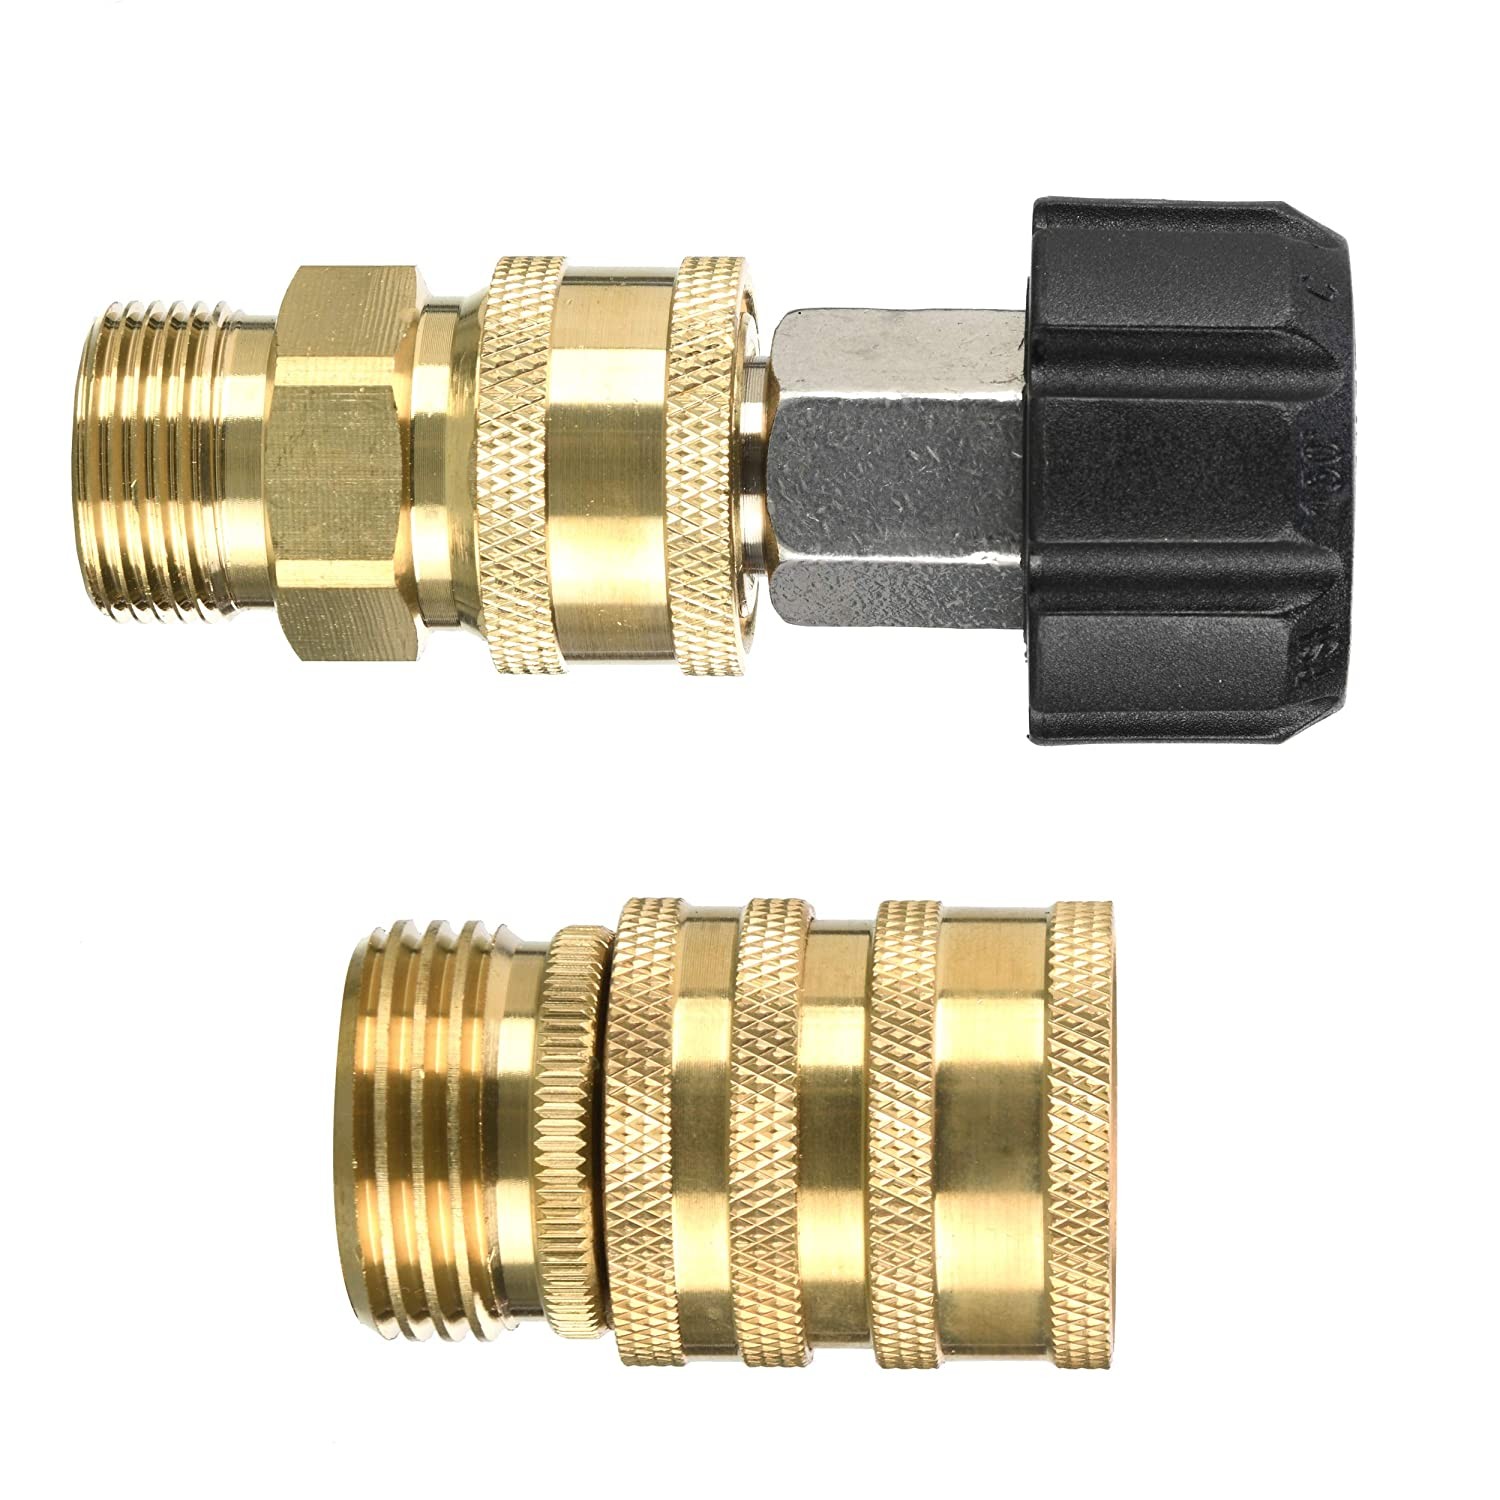 Pressure Washer Adapter Set, M22 to 3/8 Inch Quick Connect, 3/4 Inch to Quick Disconnect, Male M22 Hose Adapter